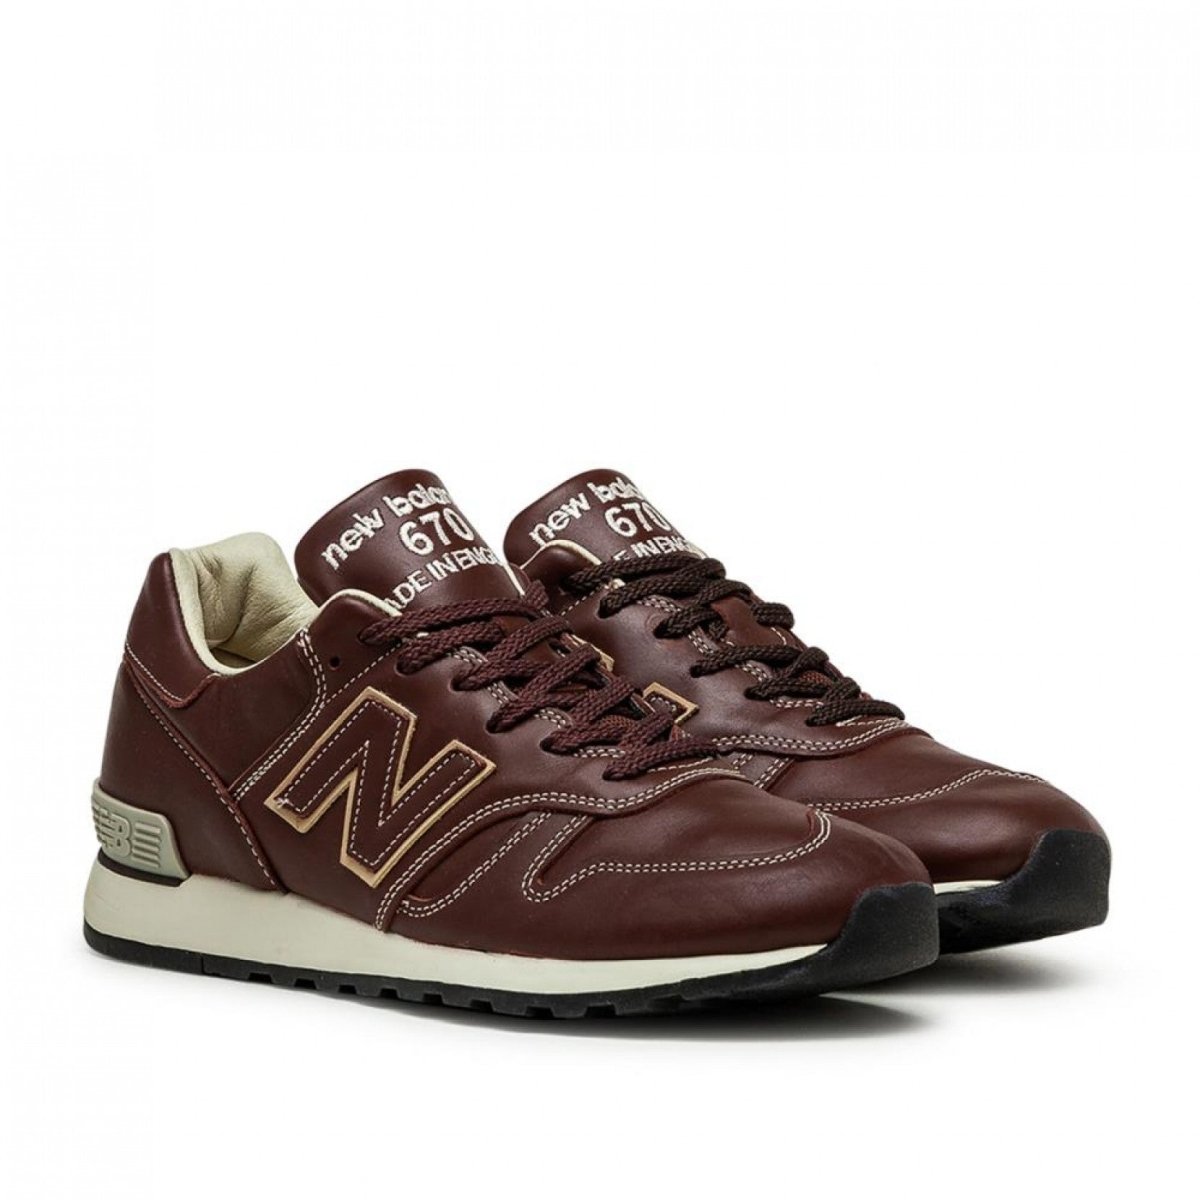 New Balance M670 BRN 'Made in England' (Brown)